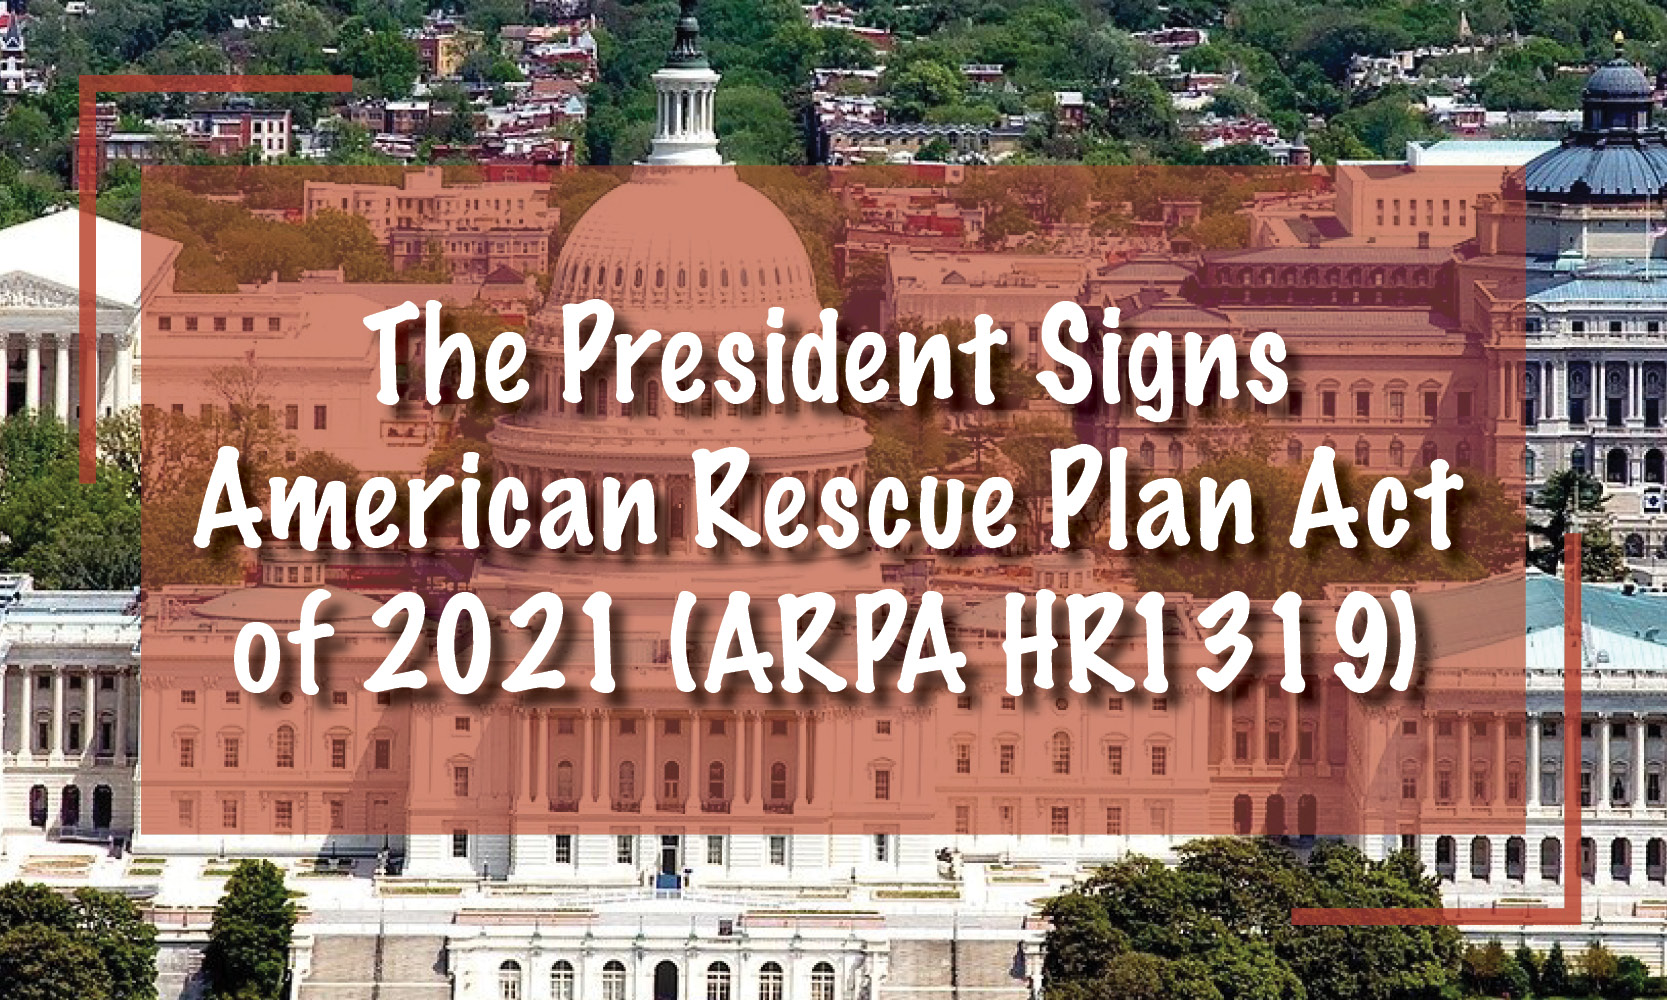 The President Signs American Rescue Plan Act of 2021 (ARPA HR1319)